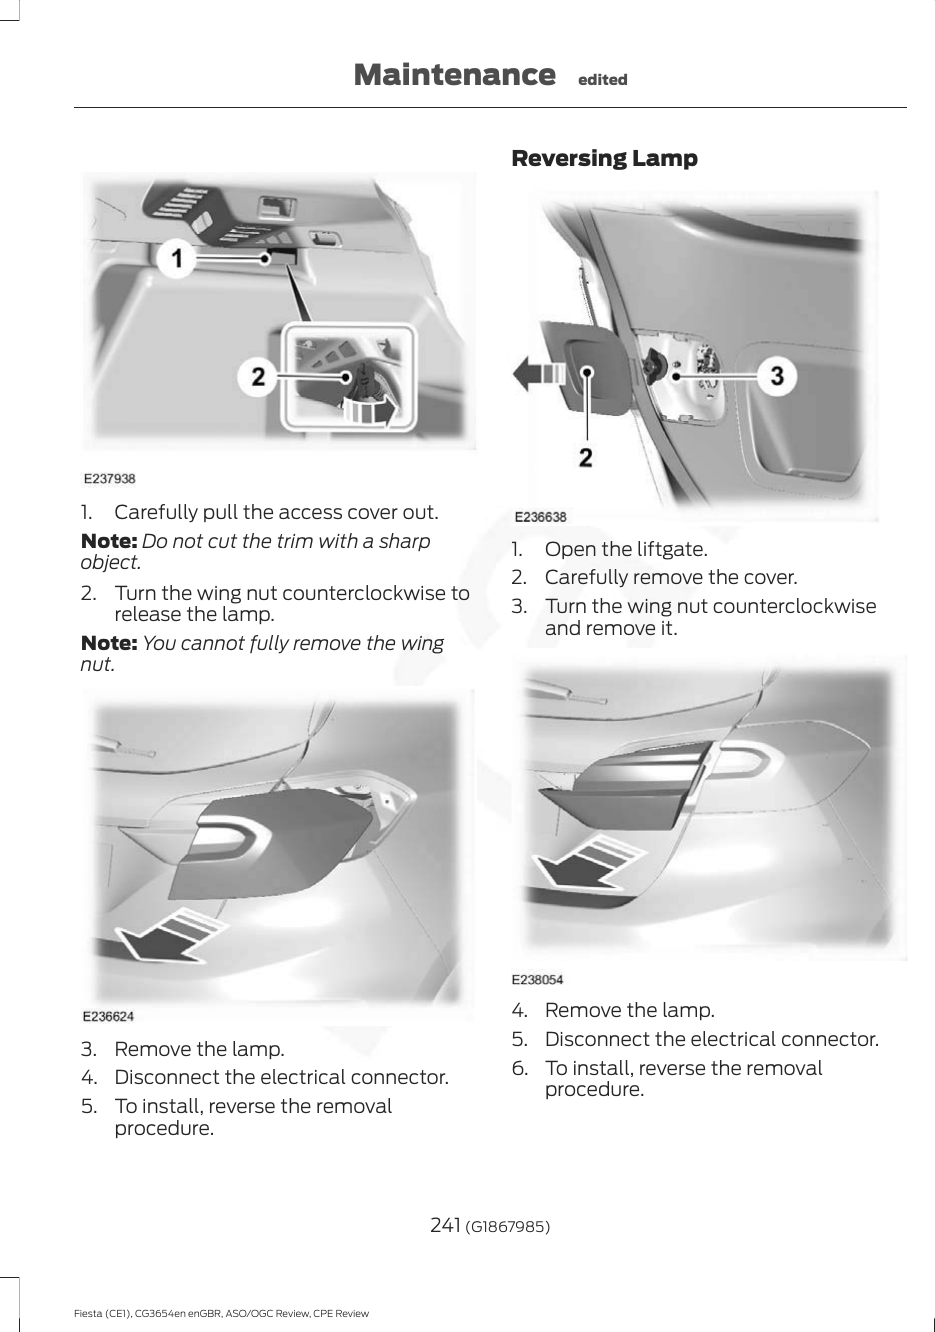 1. Carefully pull the access cover out.Note: Do not cut the trim with a sharpobject.2. Turn the wing nut counterclockwise torelease the lamp.Note: You cannot fully remove the wingnut.3. Remove the lamp.4. Disconnect the electrical connector.5. To install, reverse the removalprocedure.Reversing Lamp1. Open the liftgate.2. Carefully remove the cover.3. Turn the wing nut counterclockwiseand remove it.4. Remove the lamp.5. Disconnect the electrical connector.6. To install, reverse the removalprocedure.241 (G1867985)Fiesta (CE1), CG3654en enGBR, ASO/OGC Review, CPE ReviewMaintenance edited